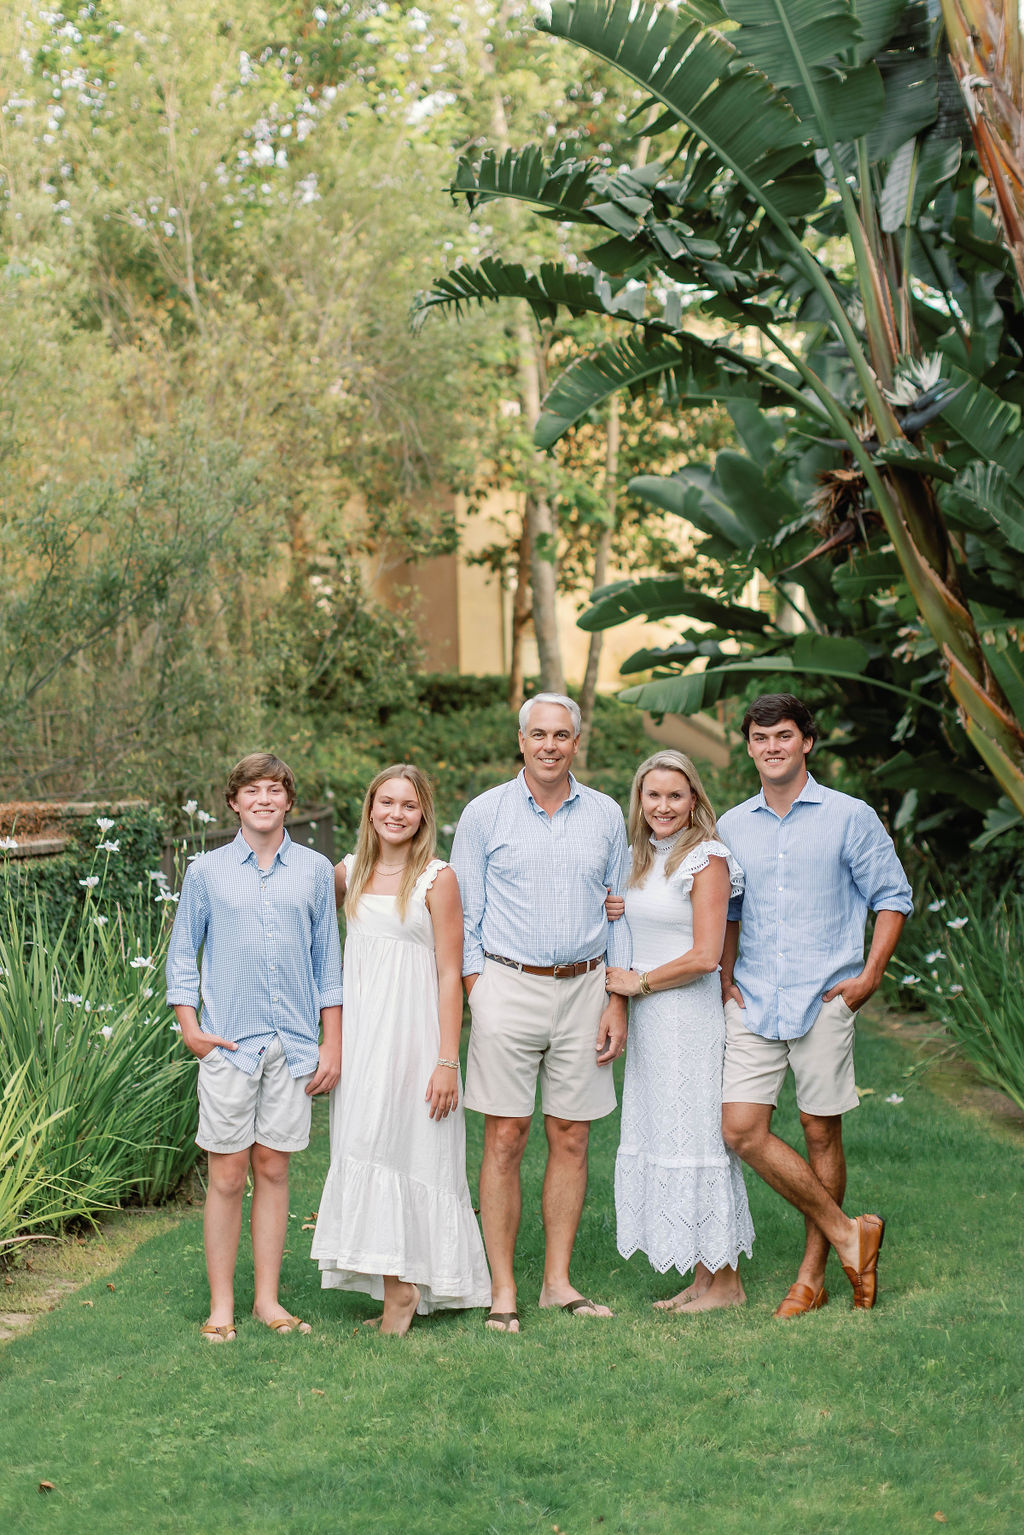 A family photo at Pelican Hill  California in the gardens with large Canary palms, flowers, stone wall and ivy.